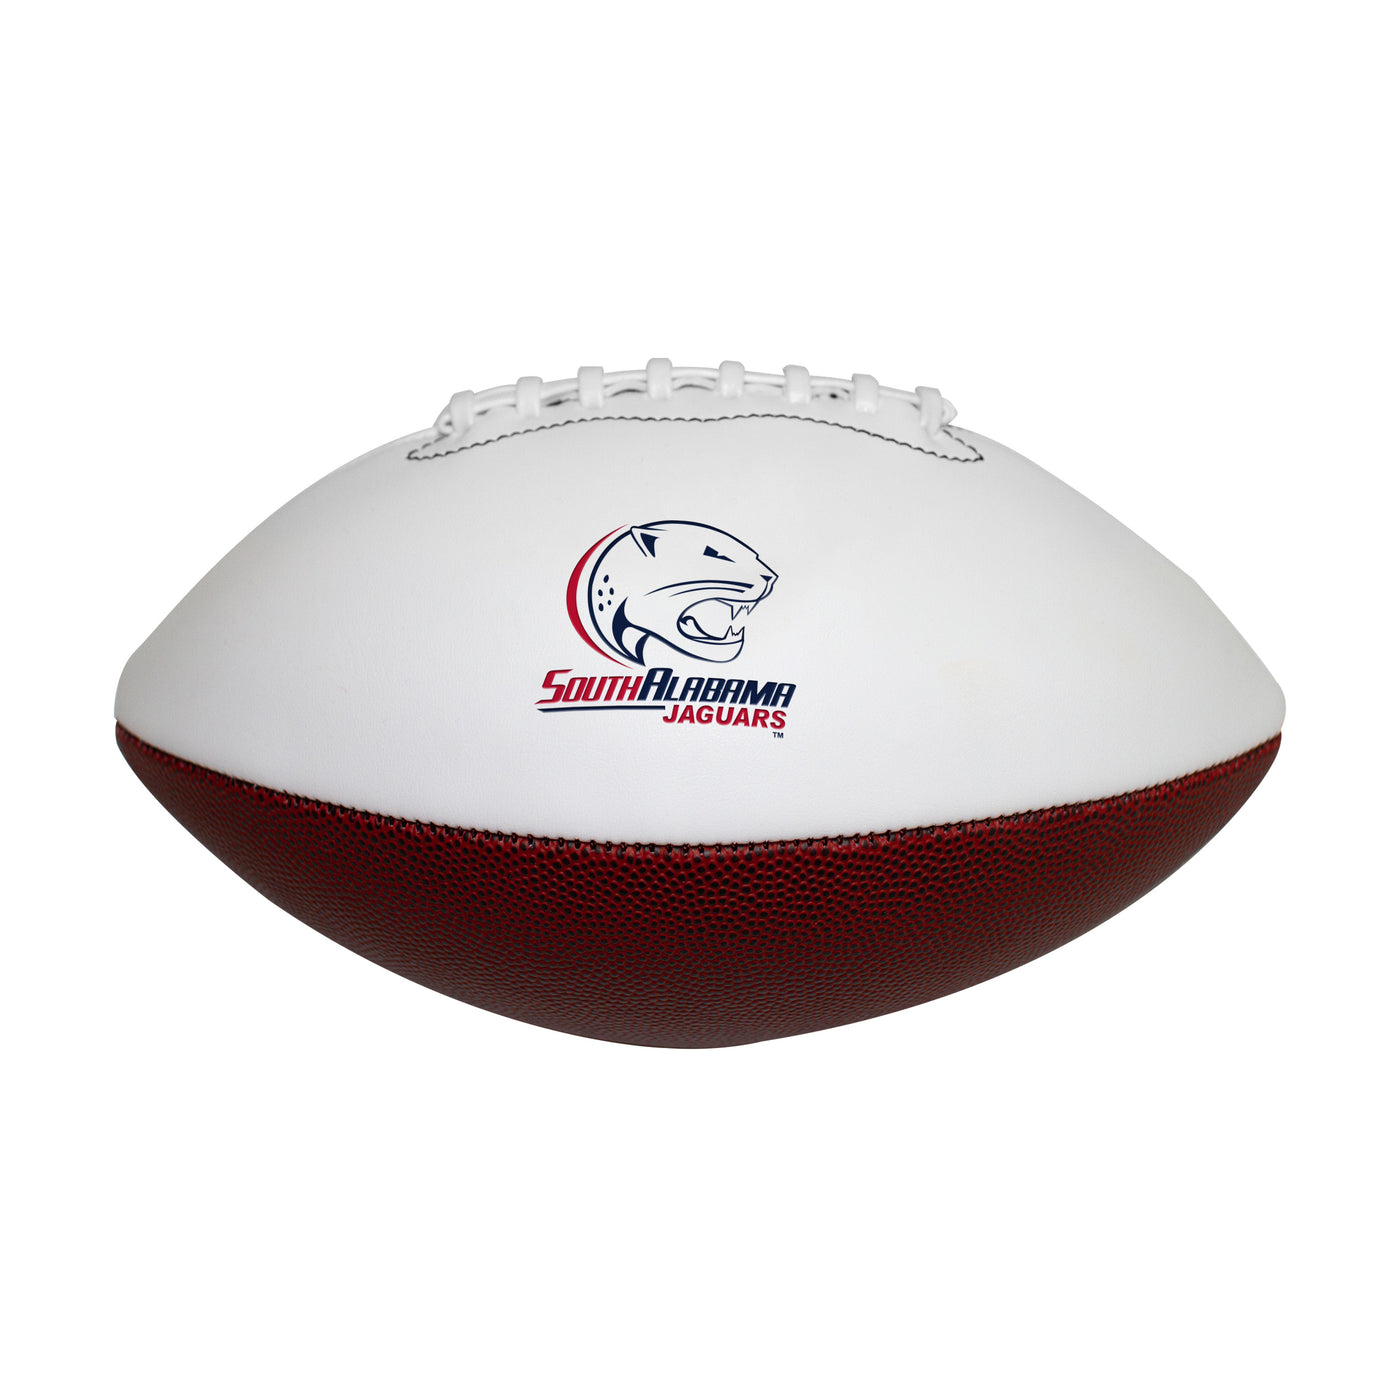 South Alabama Official-Size Autograph Football